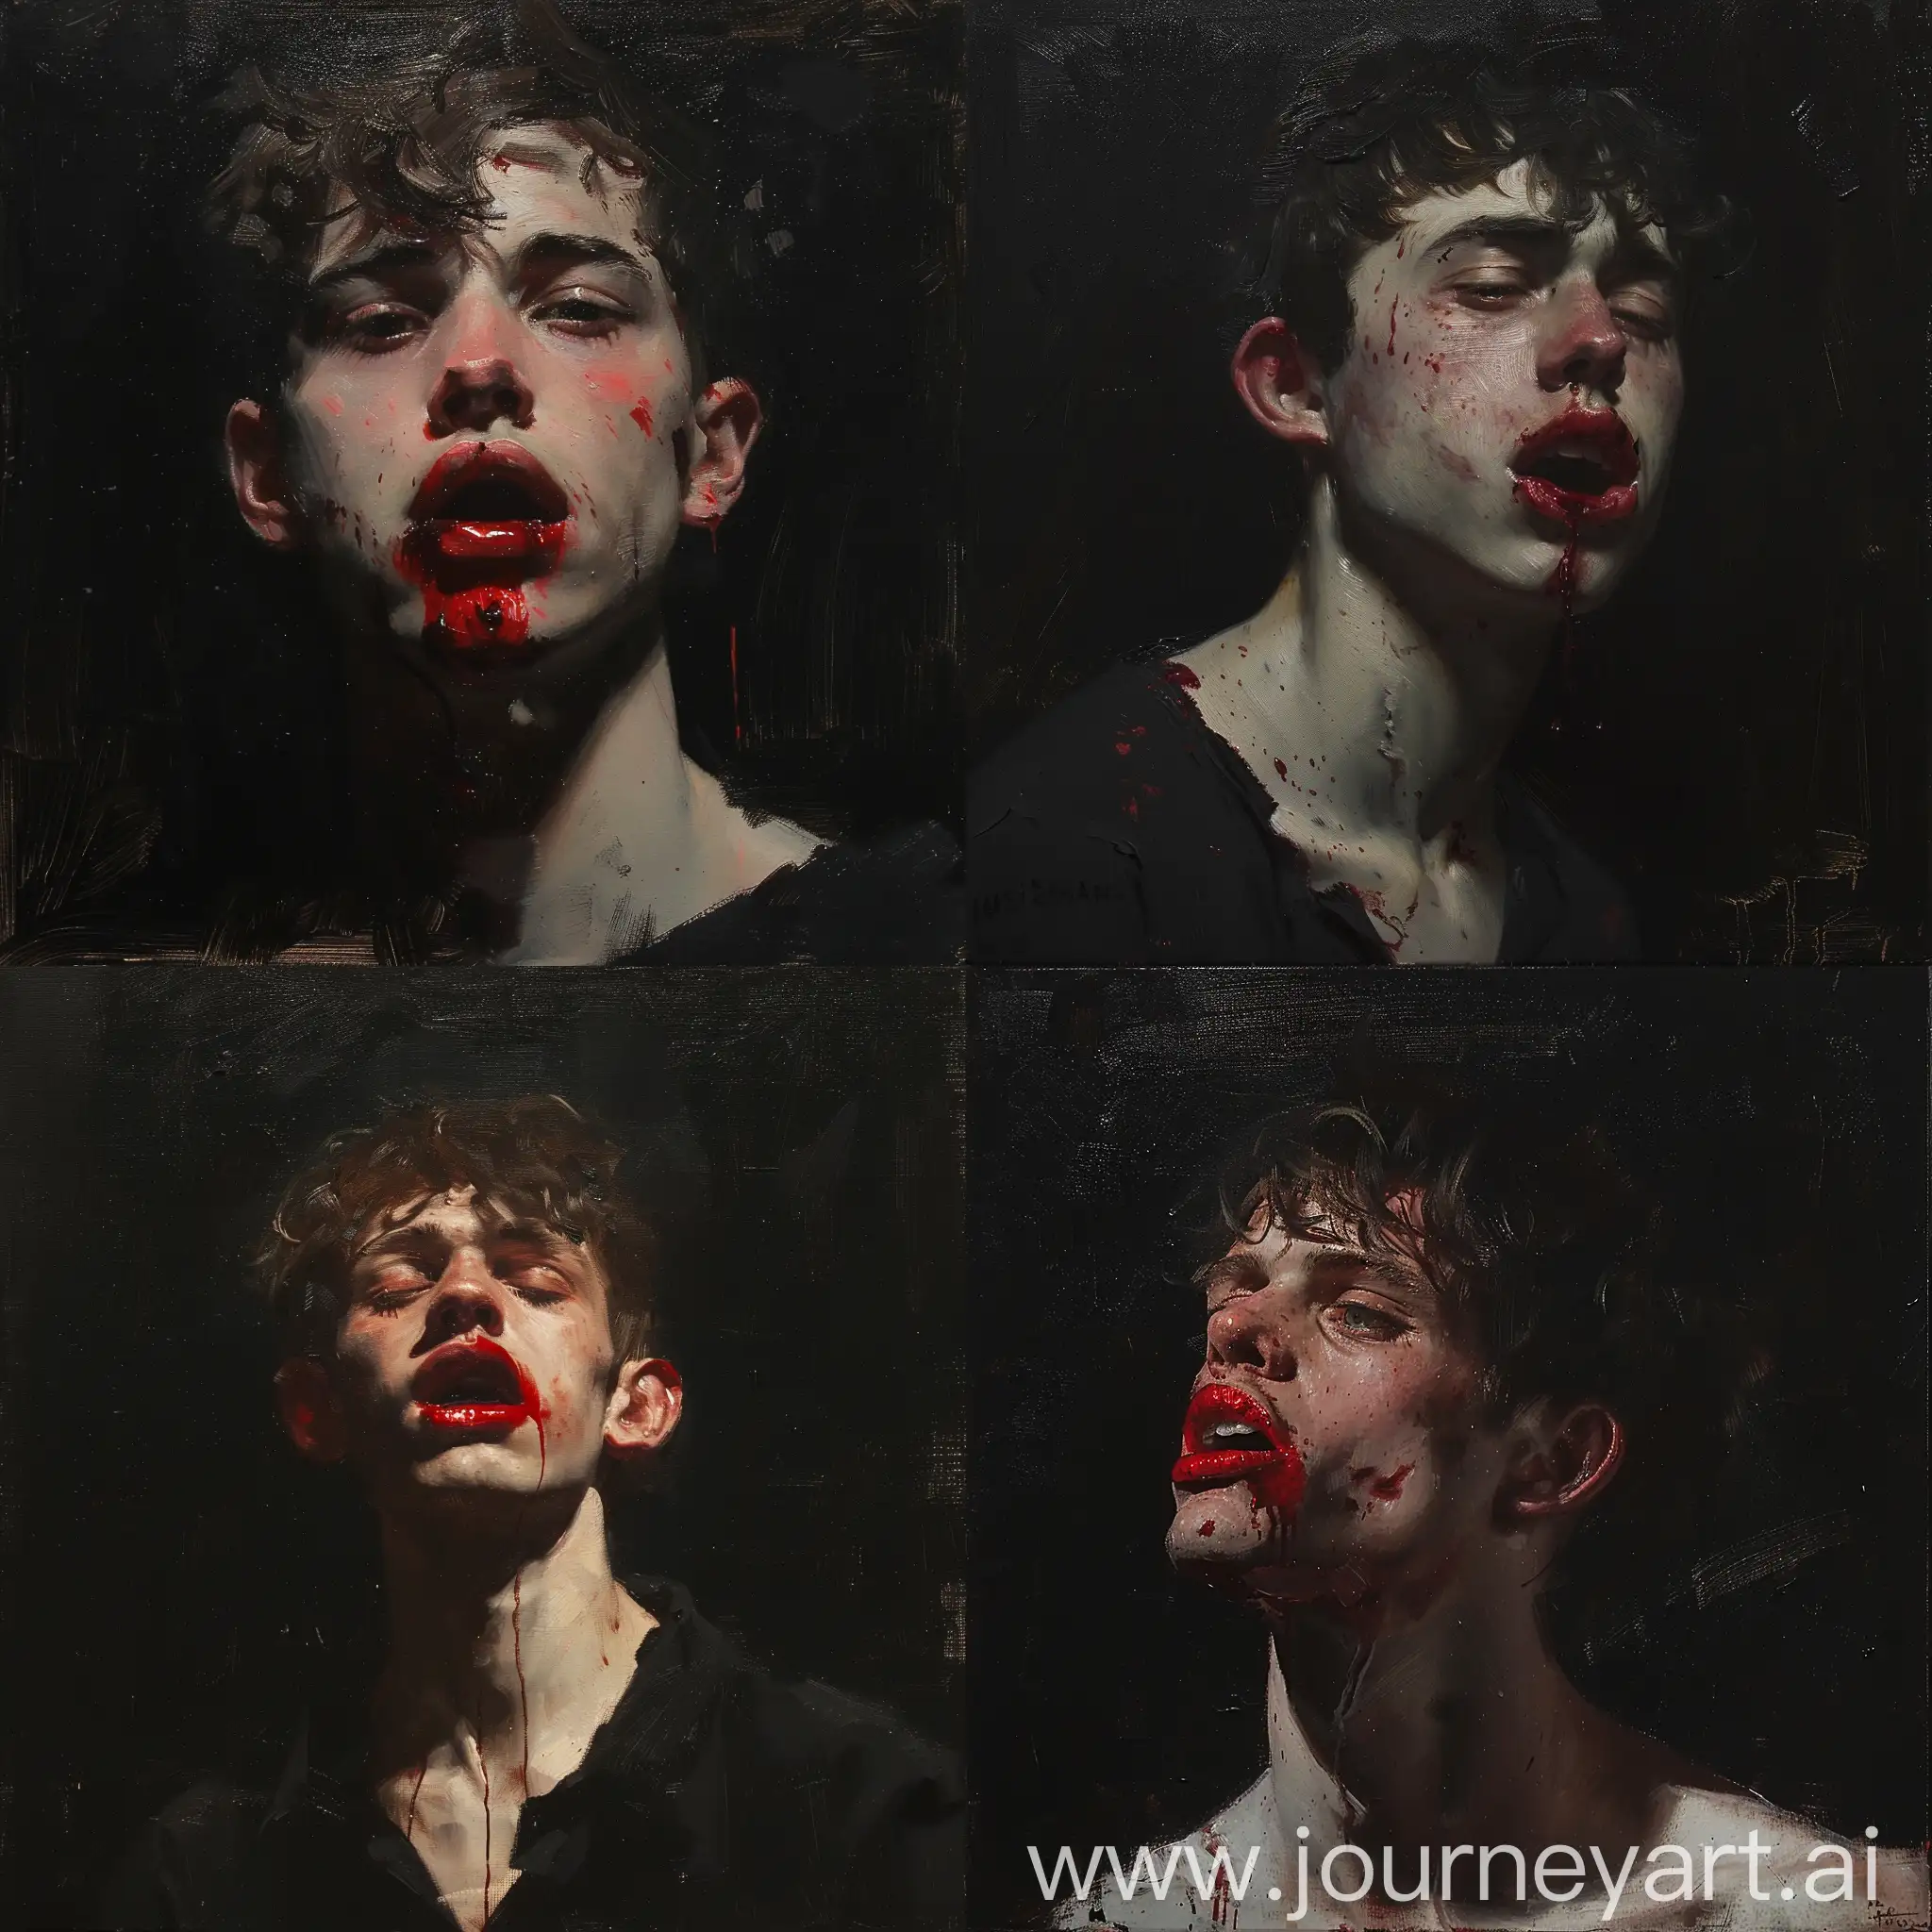 Dark painting of a young man with bloody mouth by Frank Duveneck, Oil sketch, wlop John singer Sargent, jeremy lipkin and rob rey, range murata jeremy lipking, John singer Sargent, black background, jeremy lipkin, lensculture portrait awards, casey baugh and james jean, detailed realism in painting, award-winning portrait, amazingly detailed oil painting, brushstrokes, Sean cheetham, details, well painted, good colors, strong shadows, black background